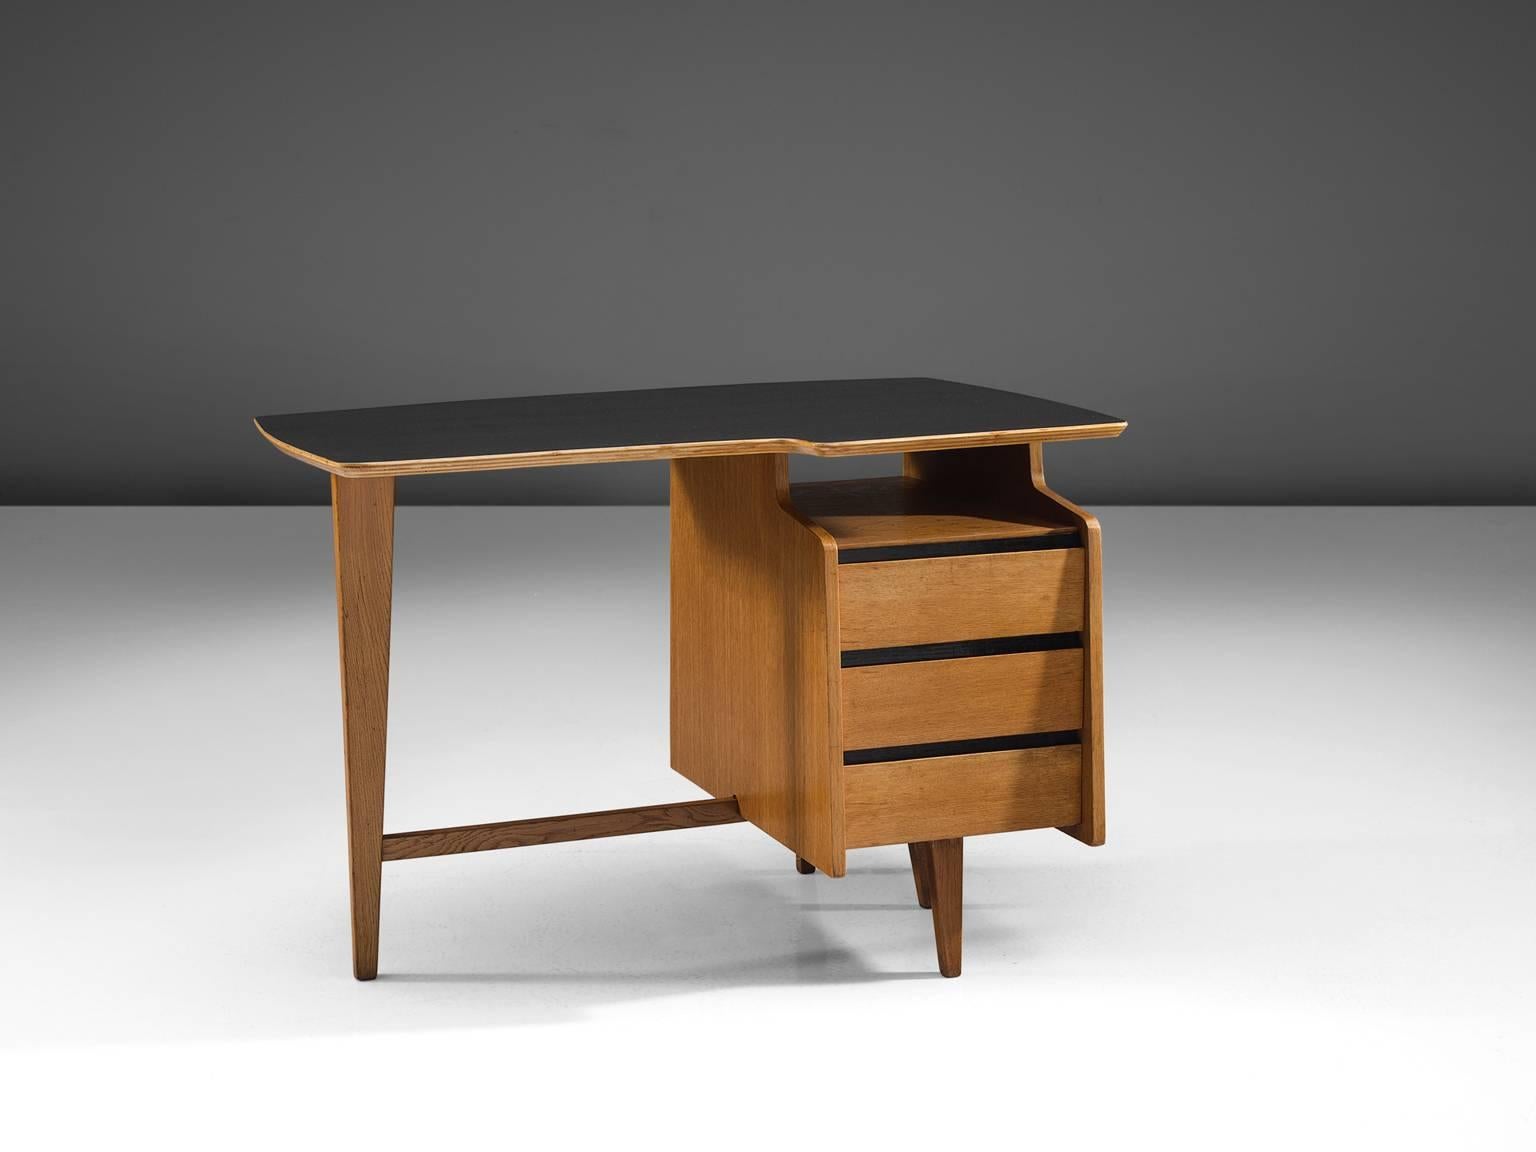 Jacques Hauville for Bema, desk, oak, Formica, France, 1960s.

This desk was designed by Jacques Hauville for Bema in the circa 1960. It has a mahogany structure with four tapered legs connected with a strut. The desk is asymmetrical and has only